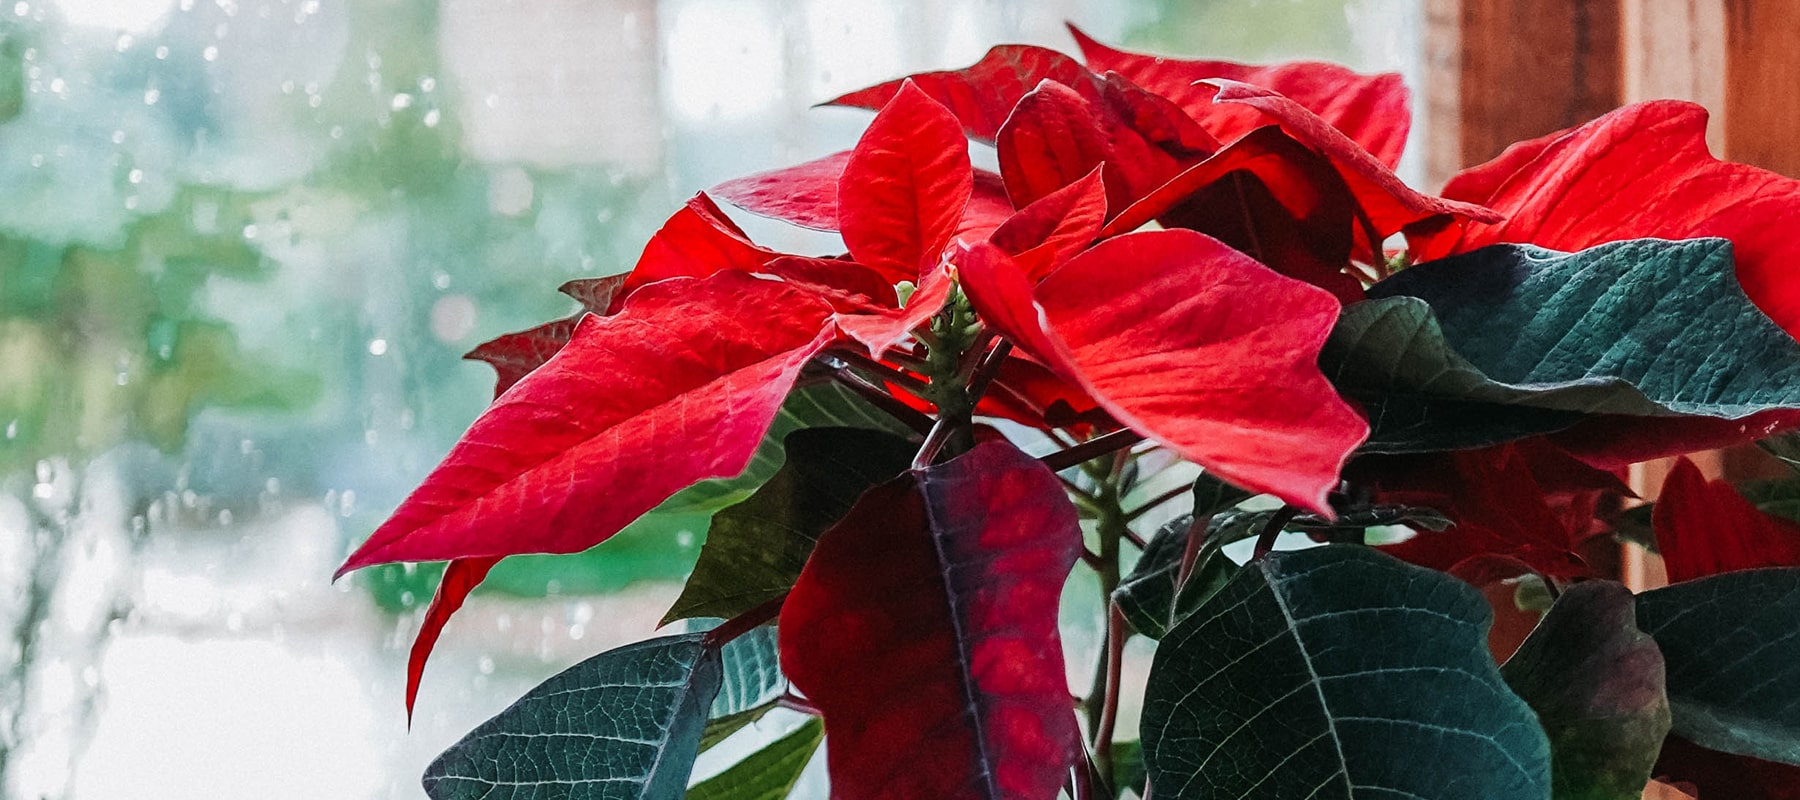 How to care for poinsettia